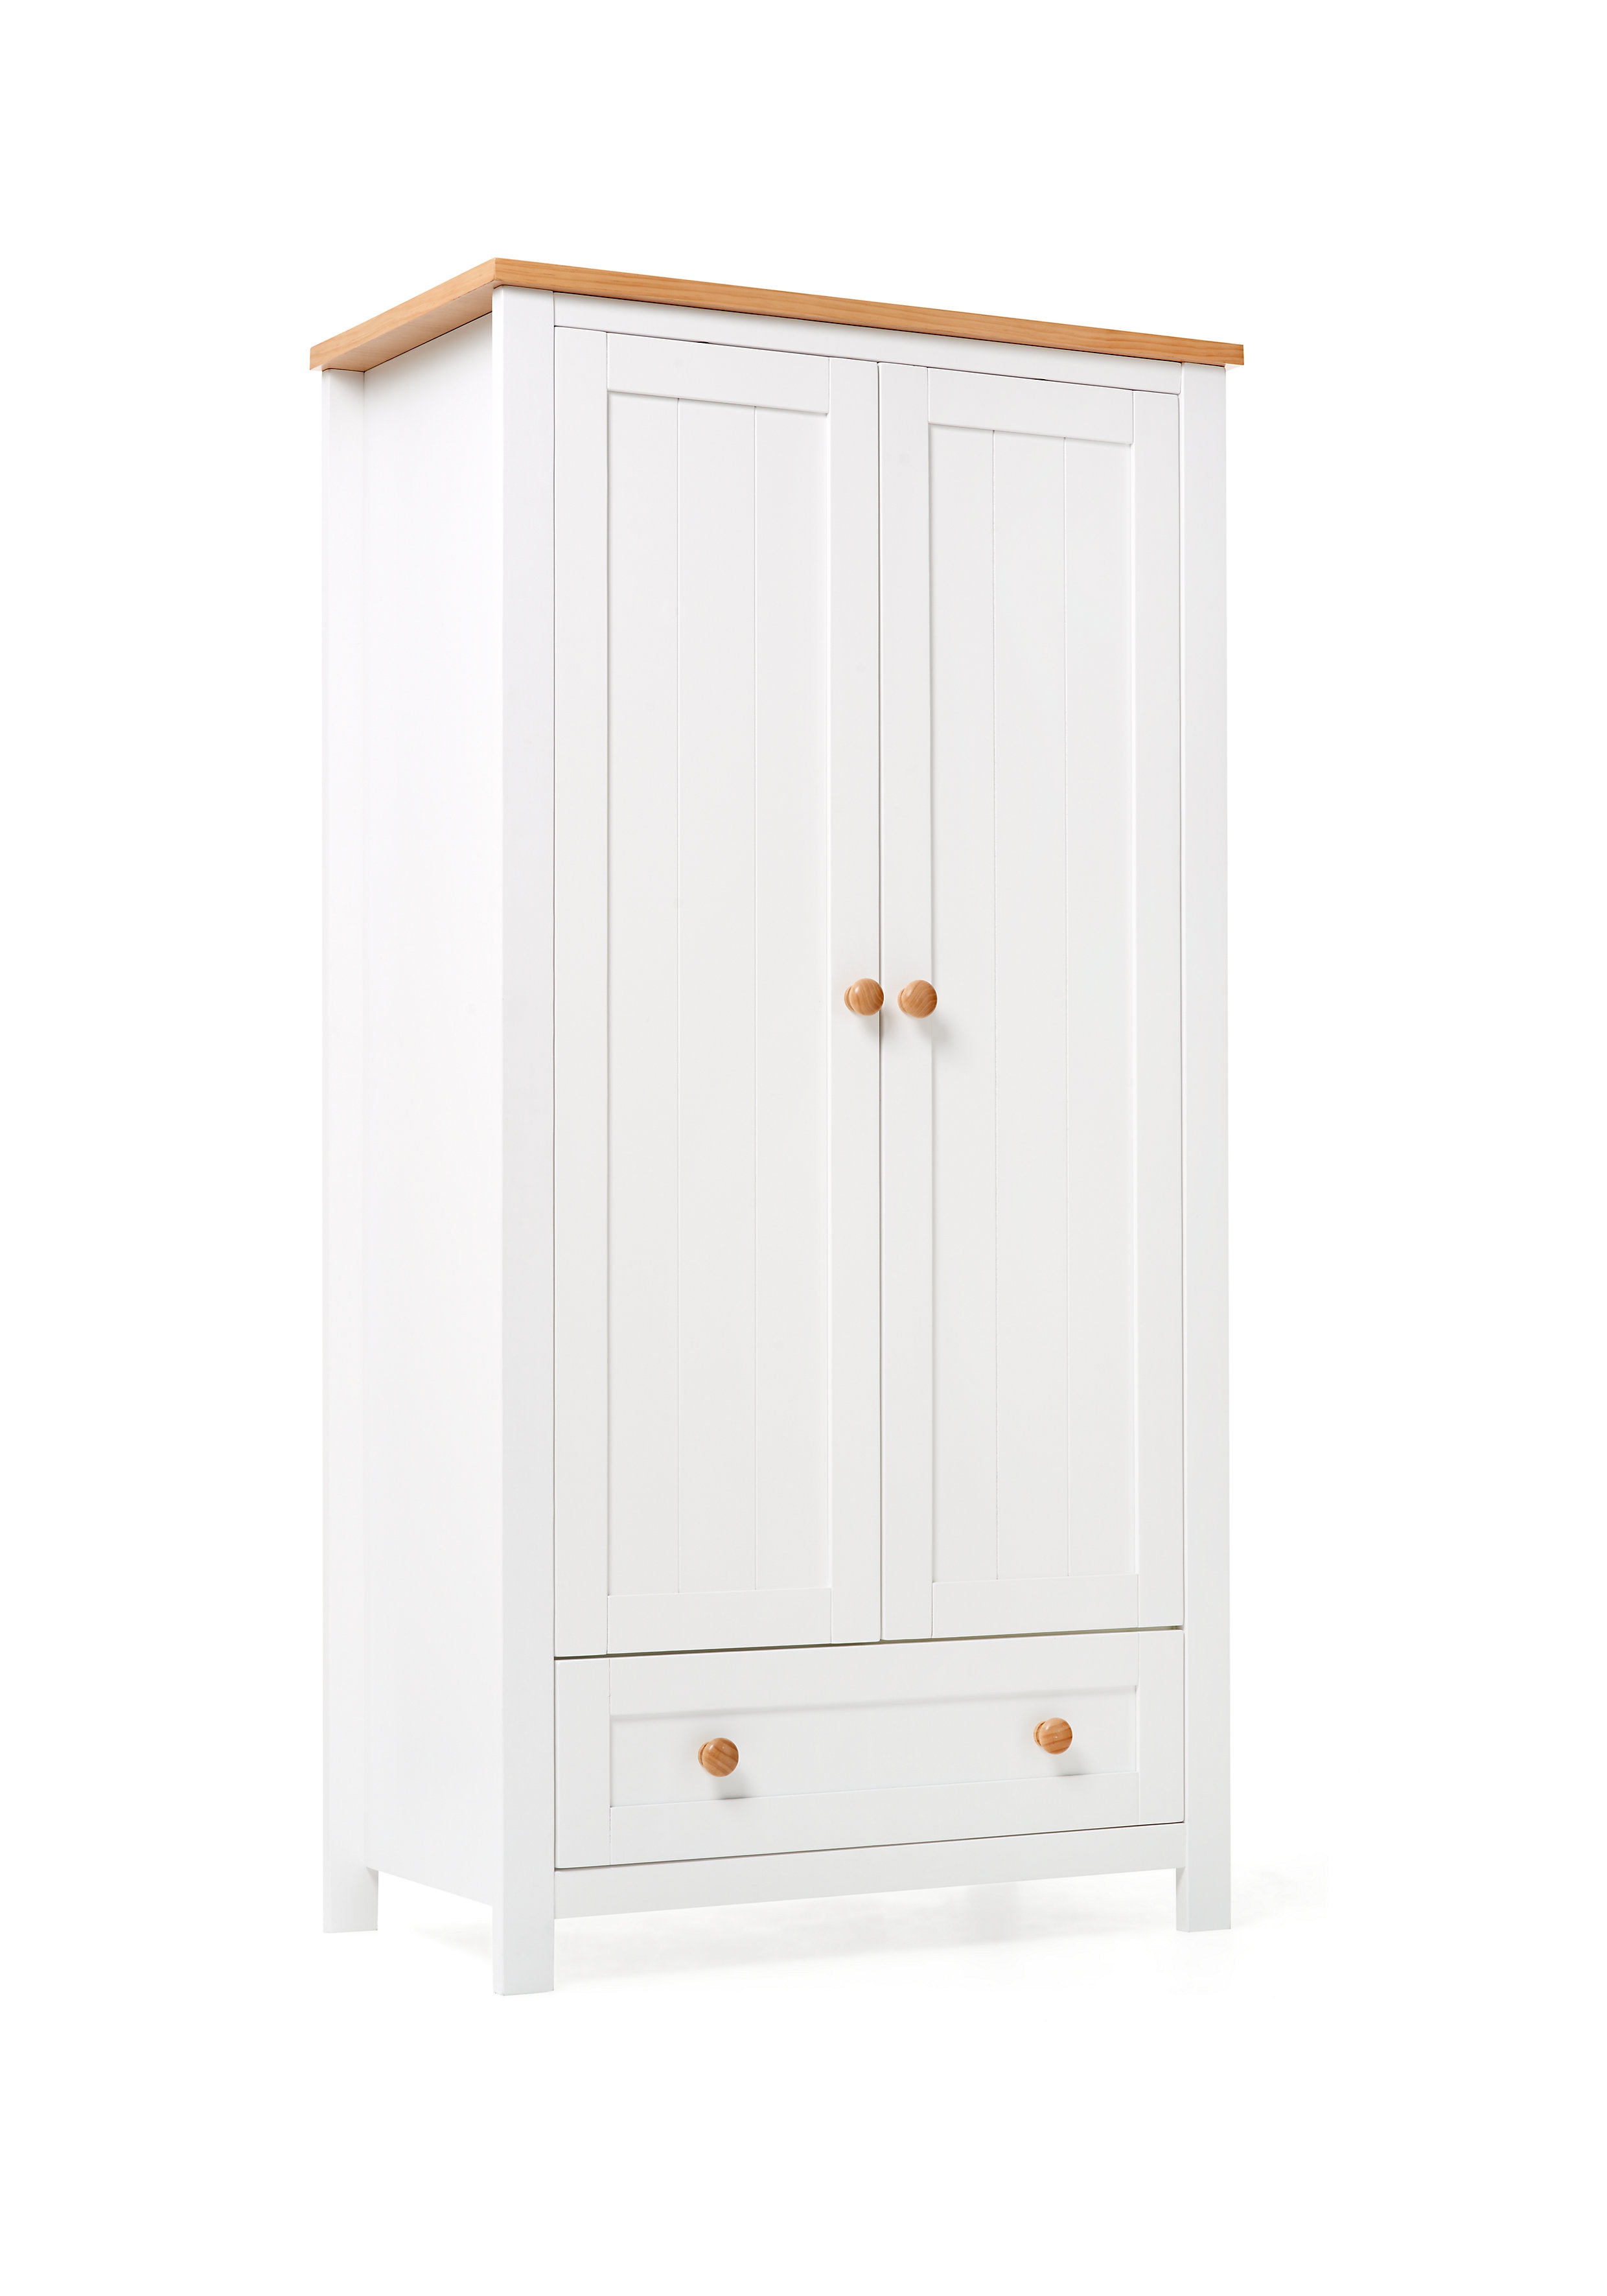 Mothercare | Mothercare Wooden Wardrobe Storage Cabinet White And Oak 